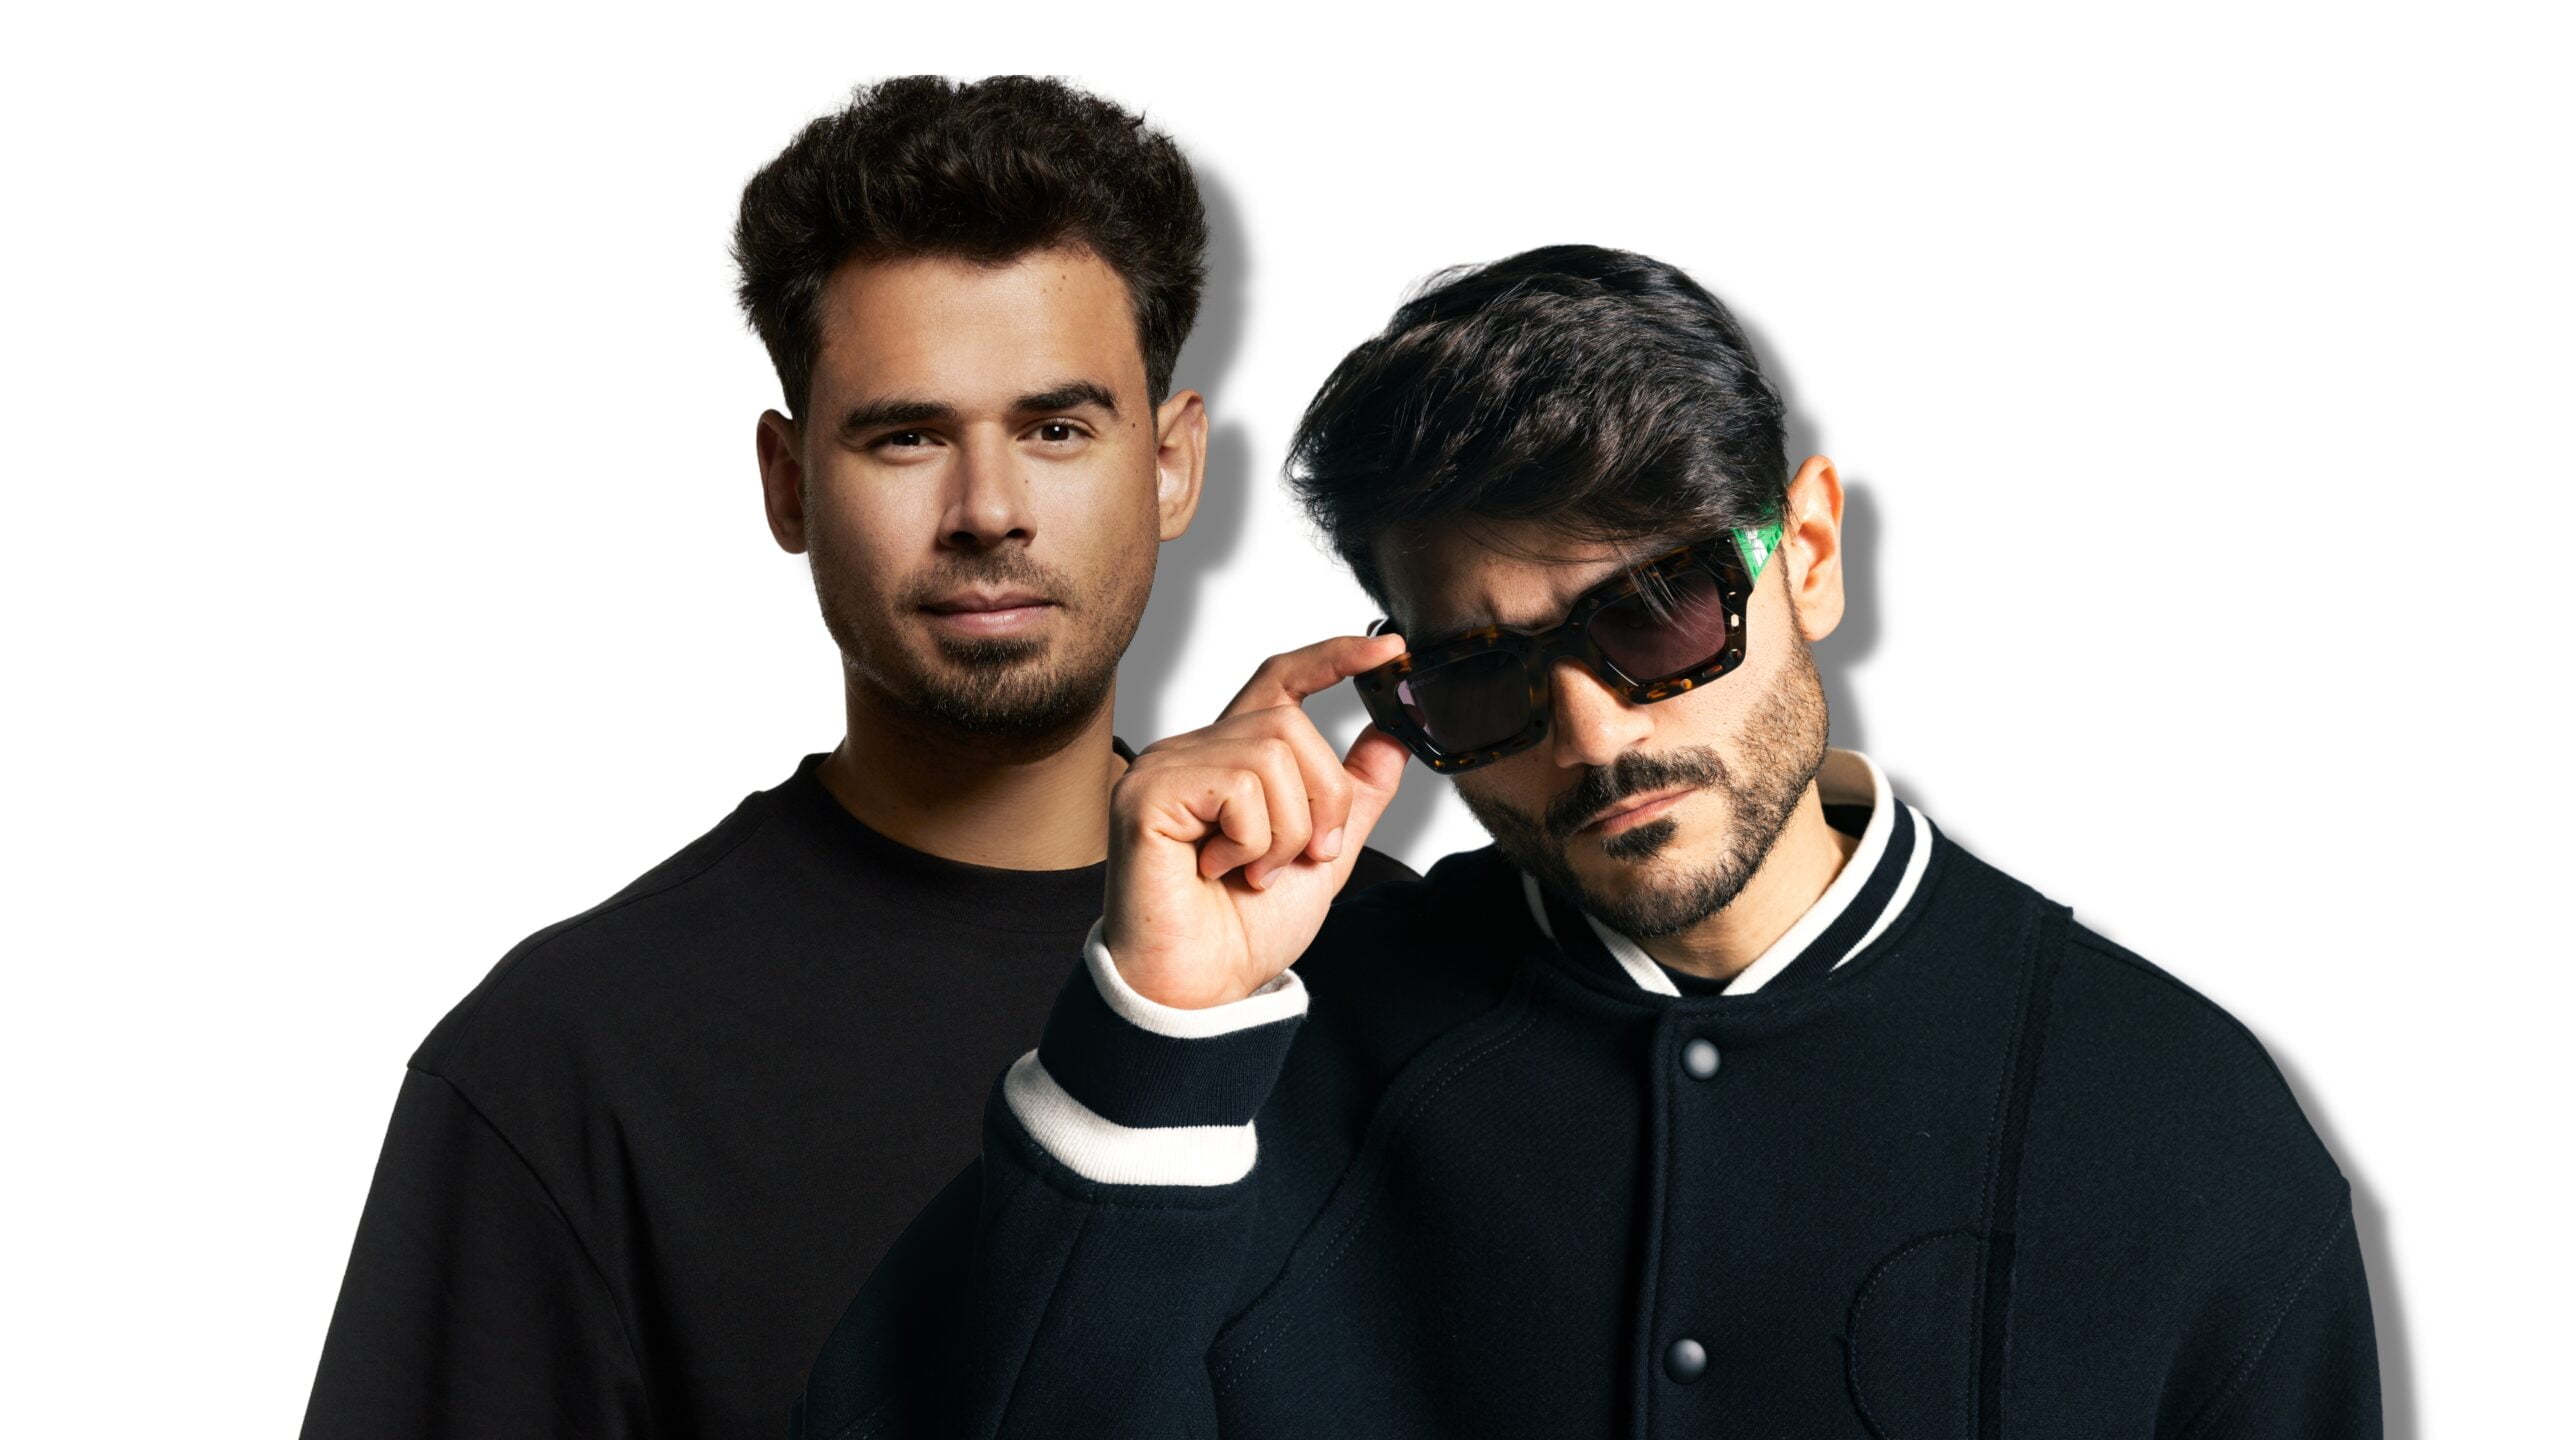 AFROJACK And EMAD Collaborate On a Dance Floor-Ready Track "Off The Wall" Soundrive Music